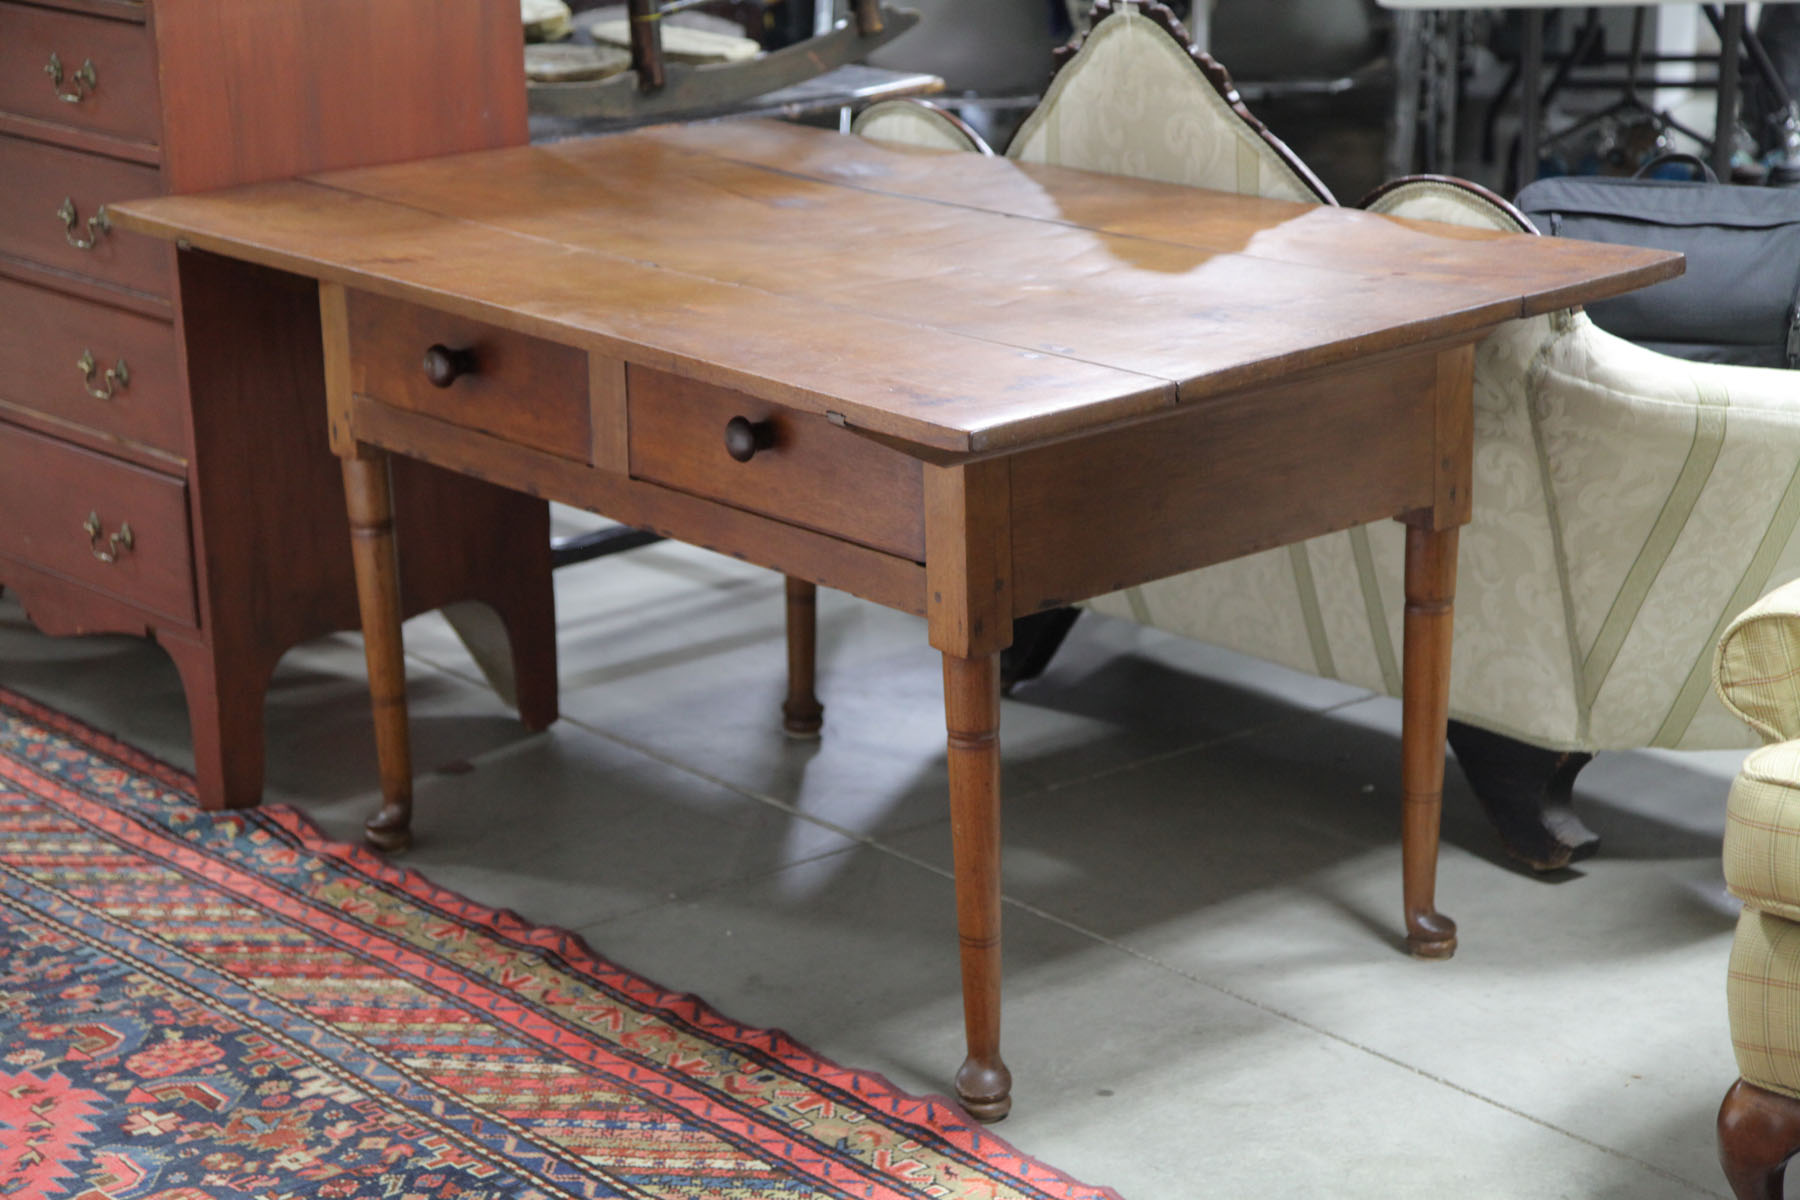 WORK TABLE.  American  mid 19th